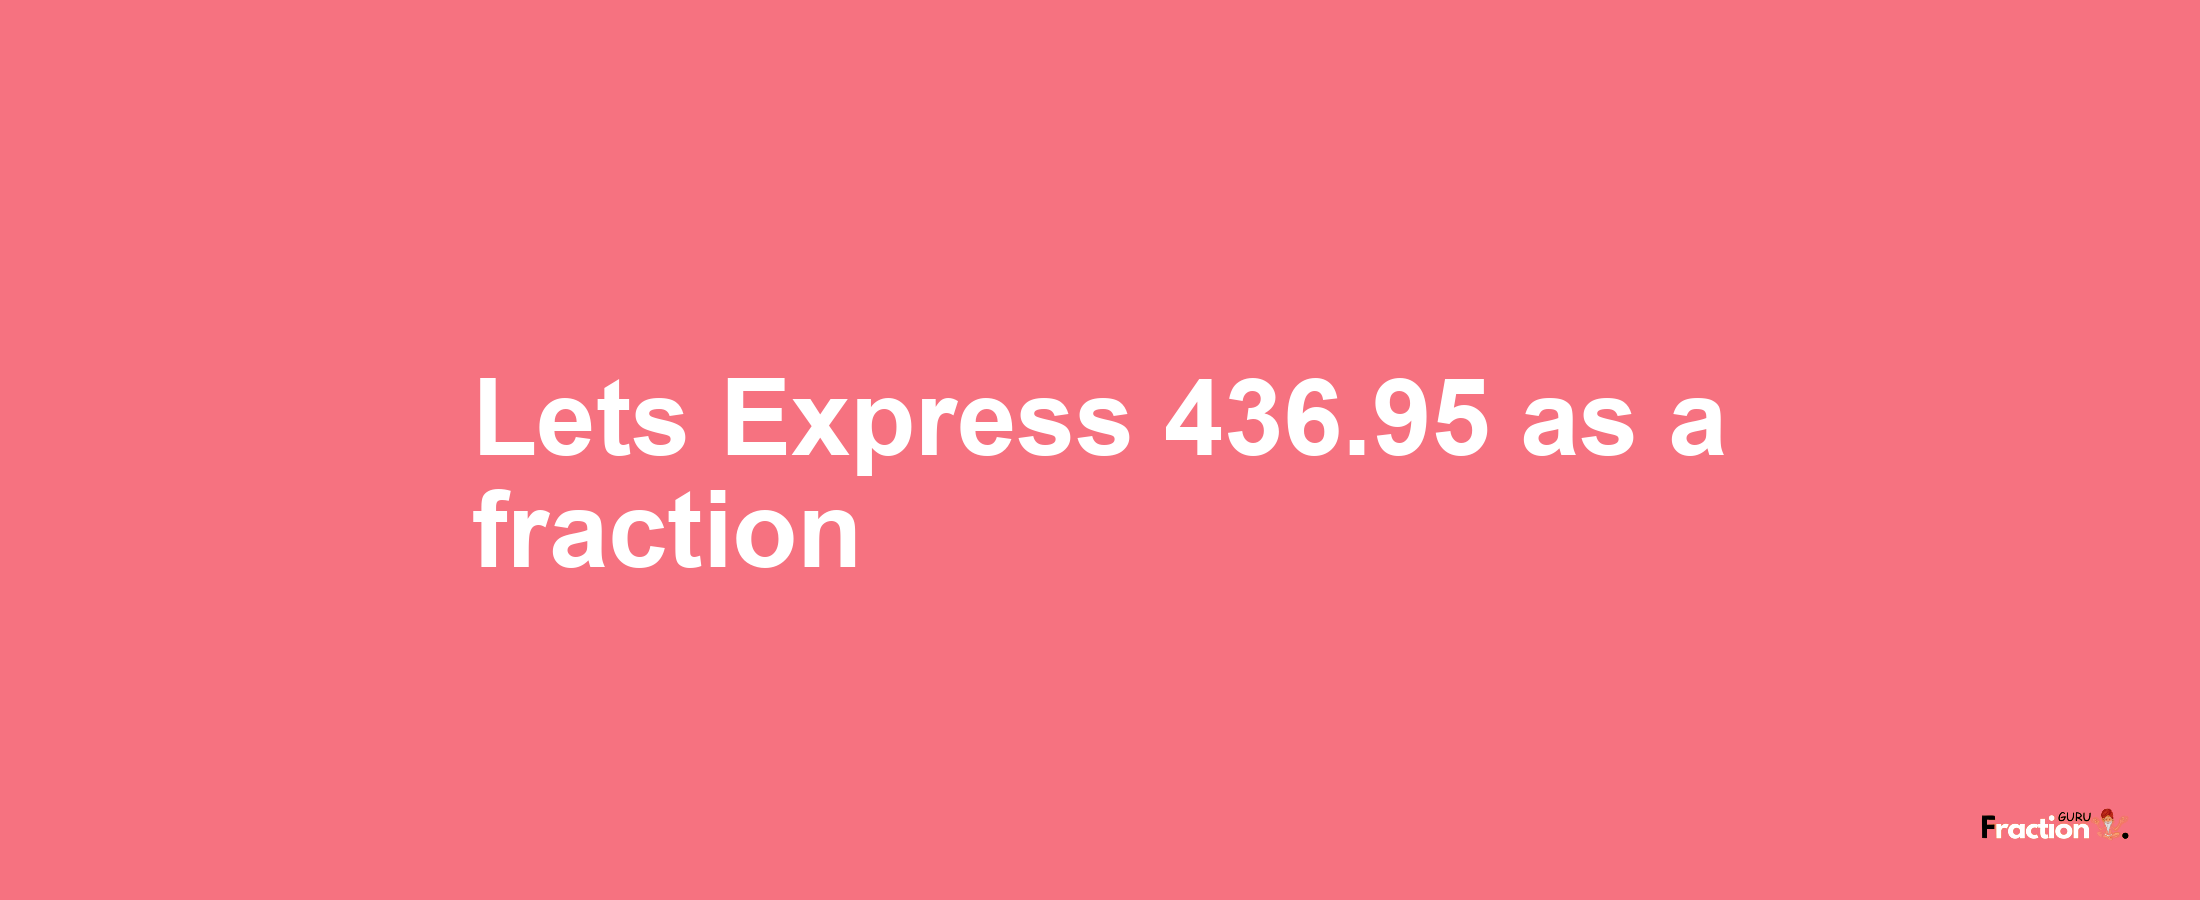 Lets Express 436.95 as afraction